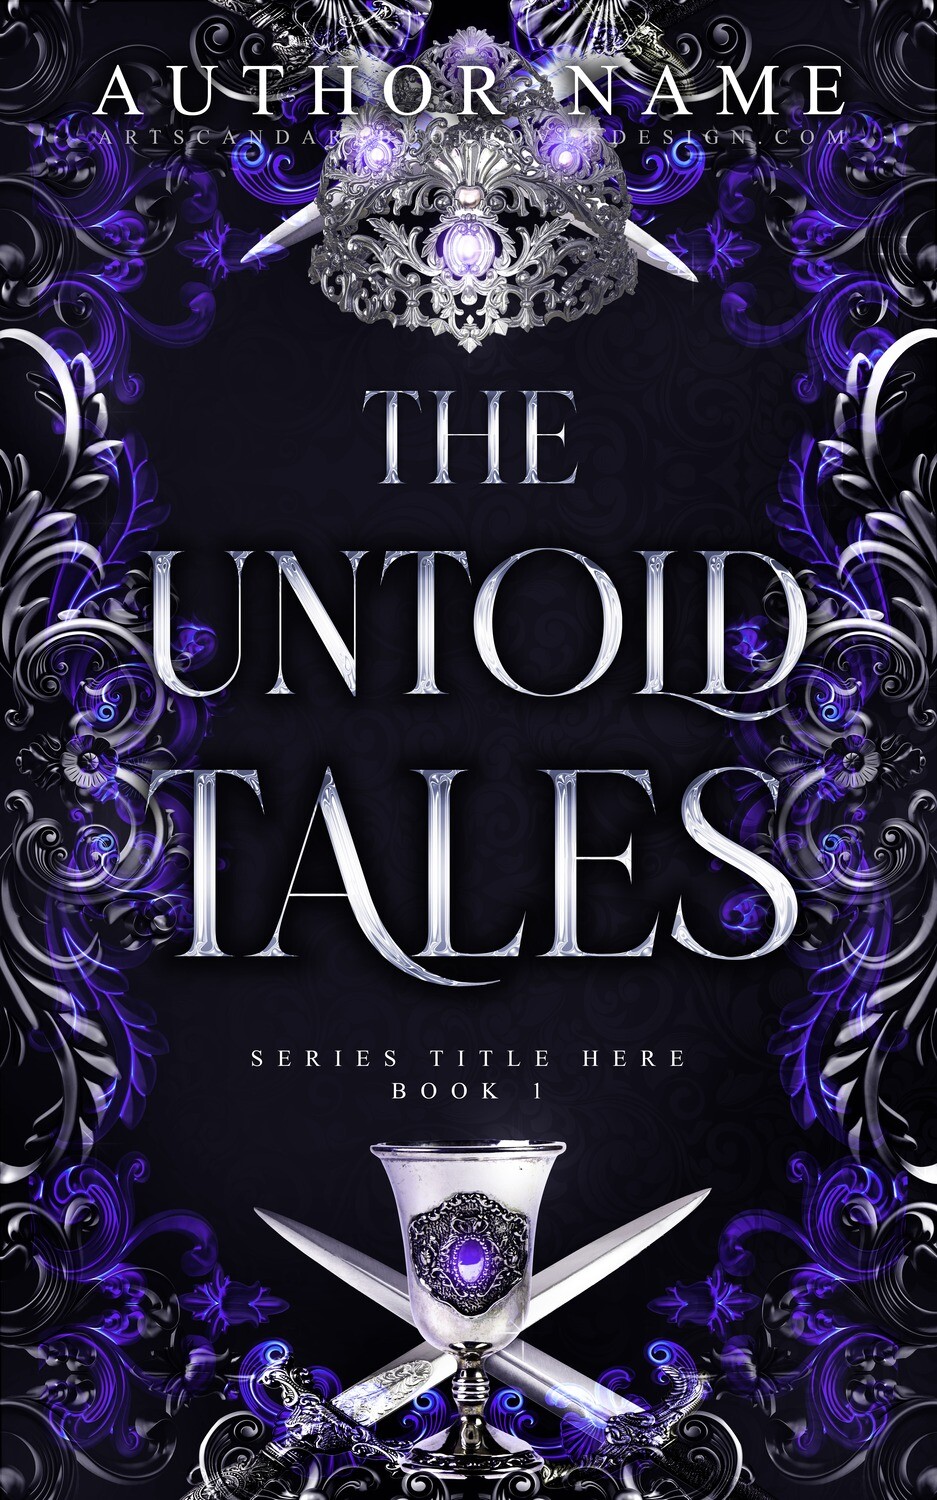 THE UNTOLD TALES